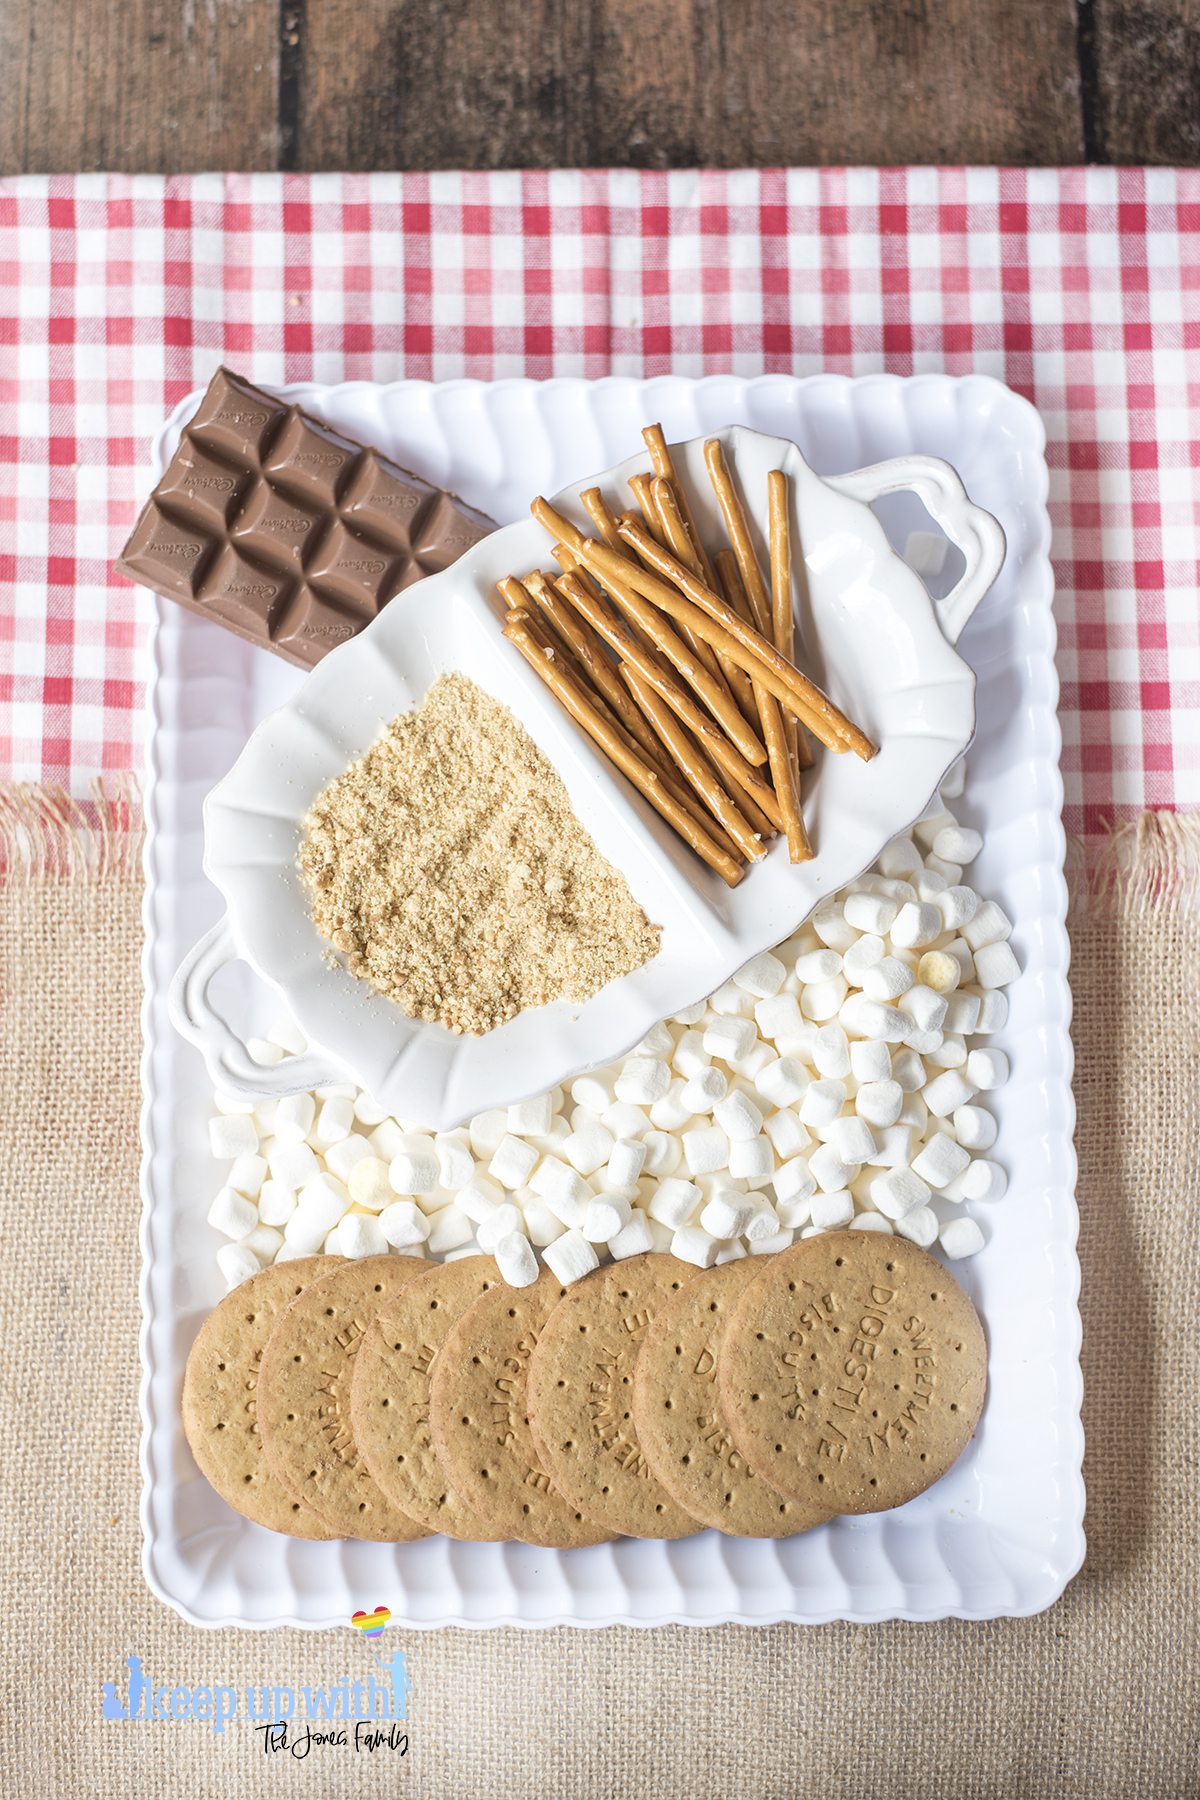 Image shows a white scalloped tray containing all of the ingredients to make Mini Campfire Chocolate Fondue Buckets. Mini marshmallows, digestive biscuits, pretzel sticks and chocolate. Image by Keep Up With The Jones Family.